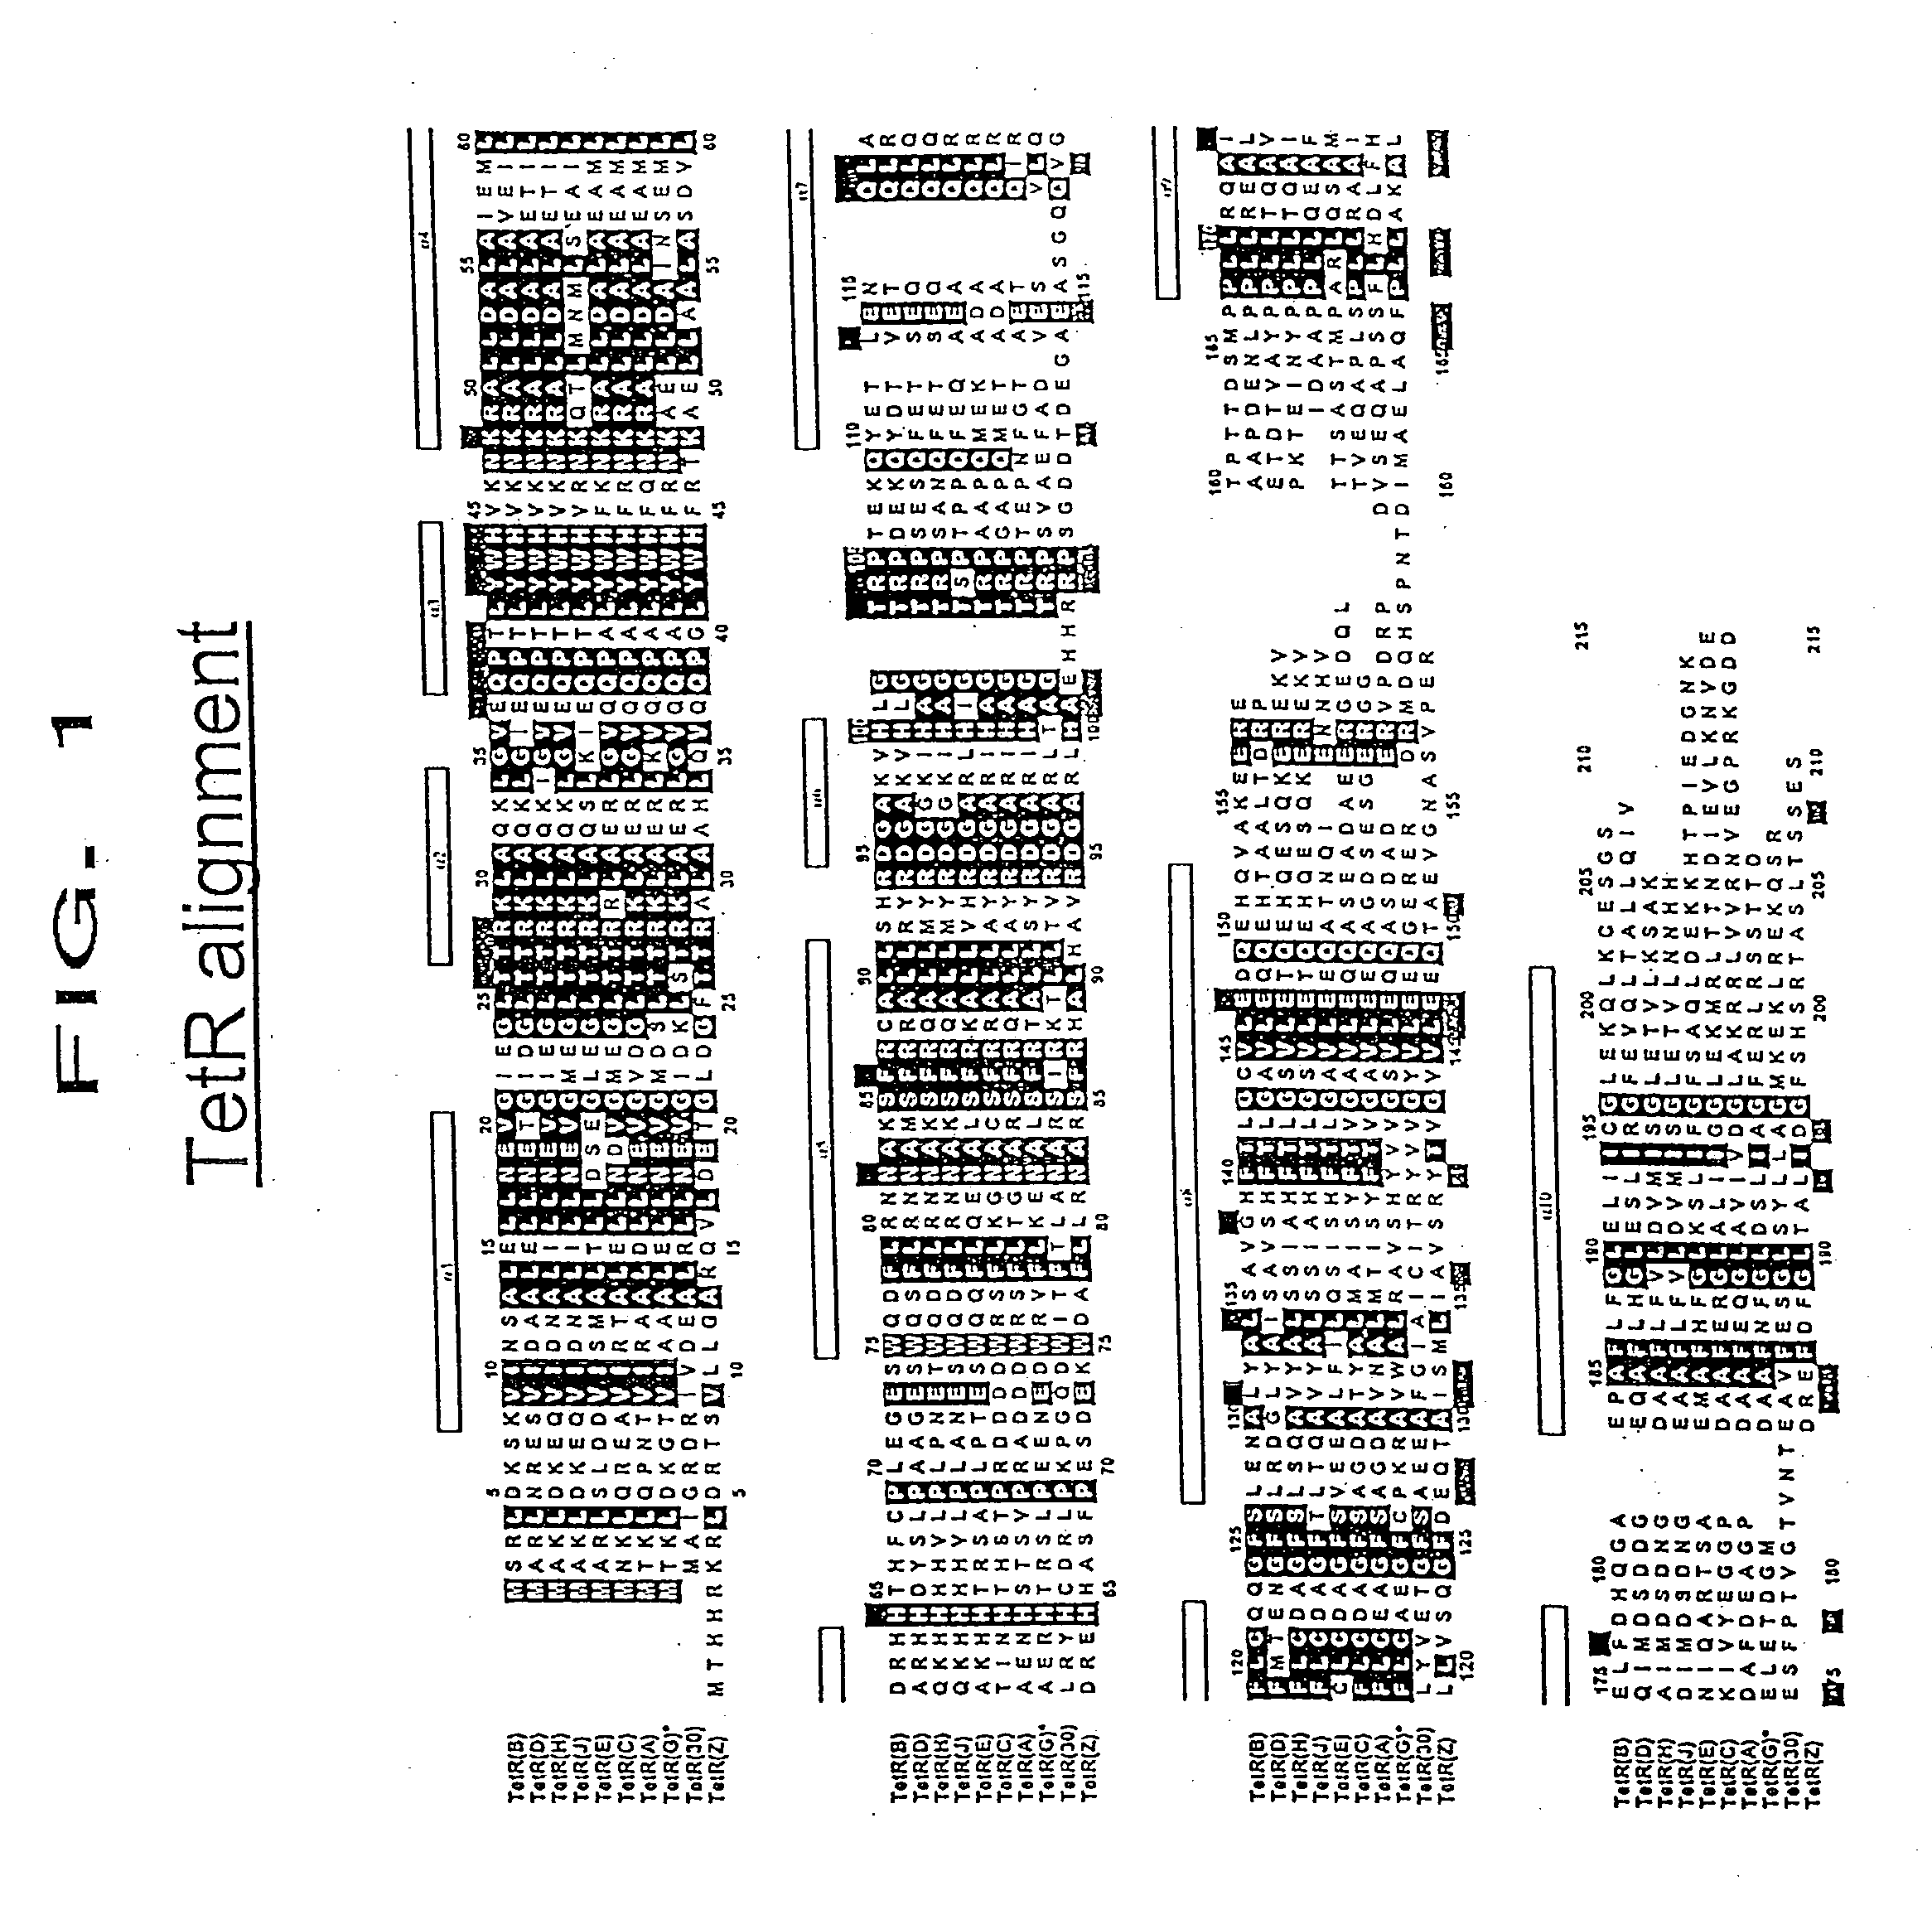 Modified tetracycline repressor protein compositions and methods of use